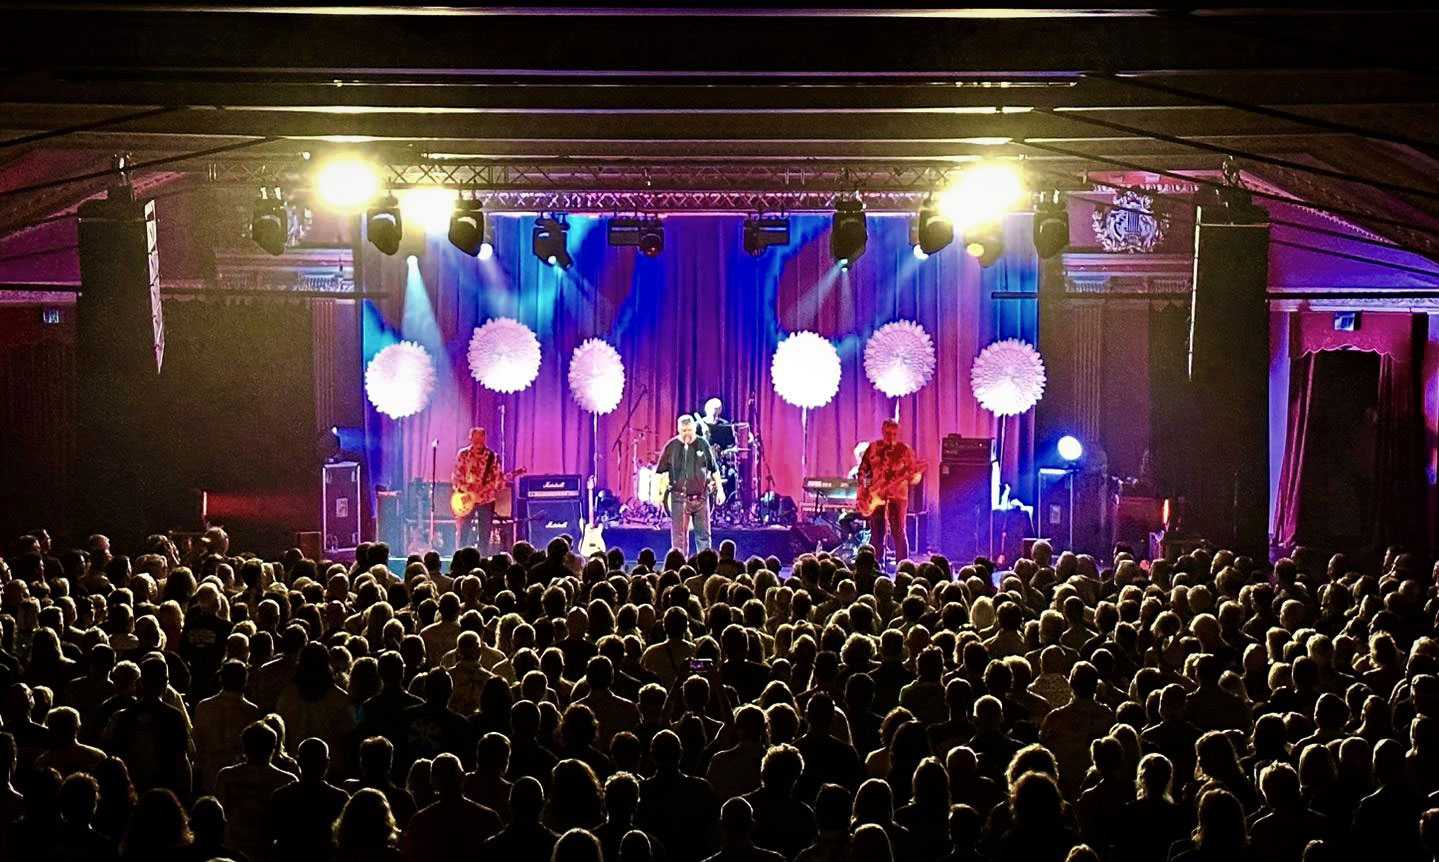 Anita’s Theatre recently became Live Nation’s first regional live music venue in Australia